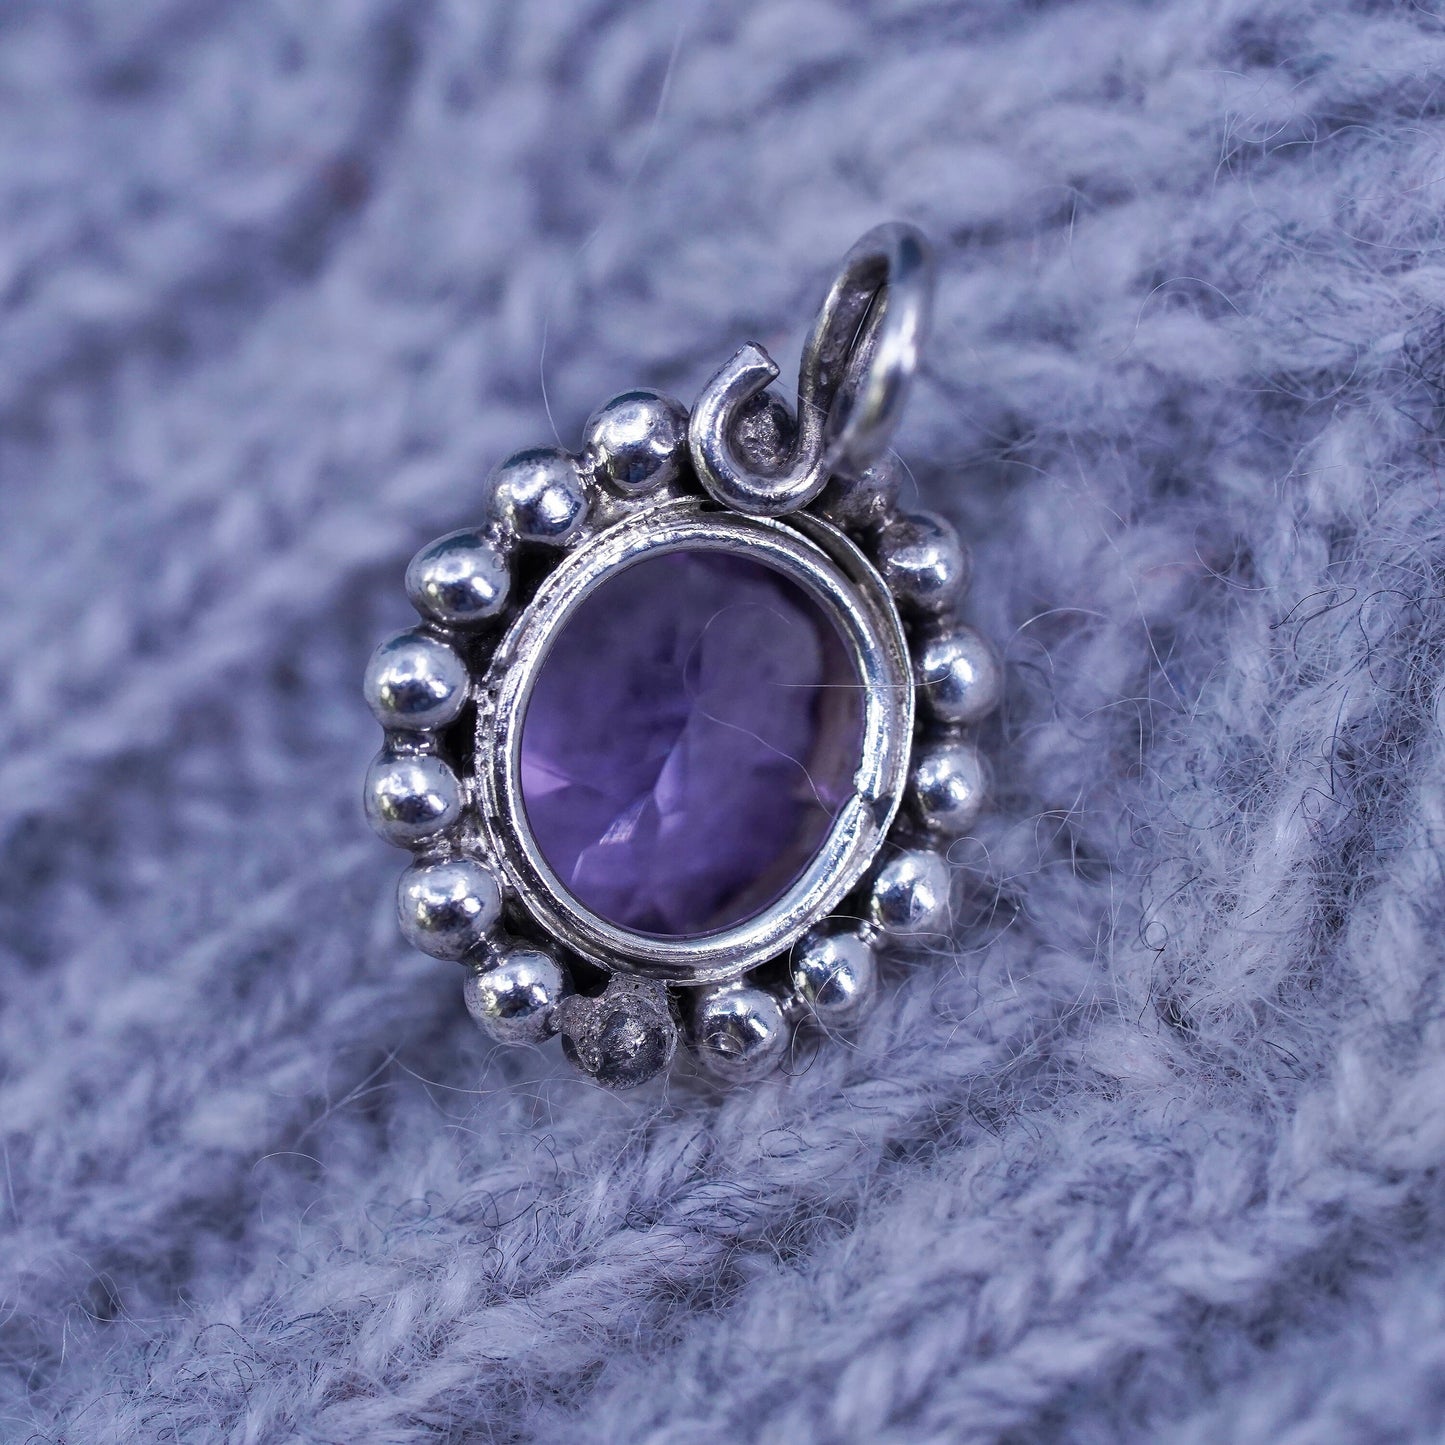 Vintage Sterling silver handmade pendant, 925 oval with amethyst and beads